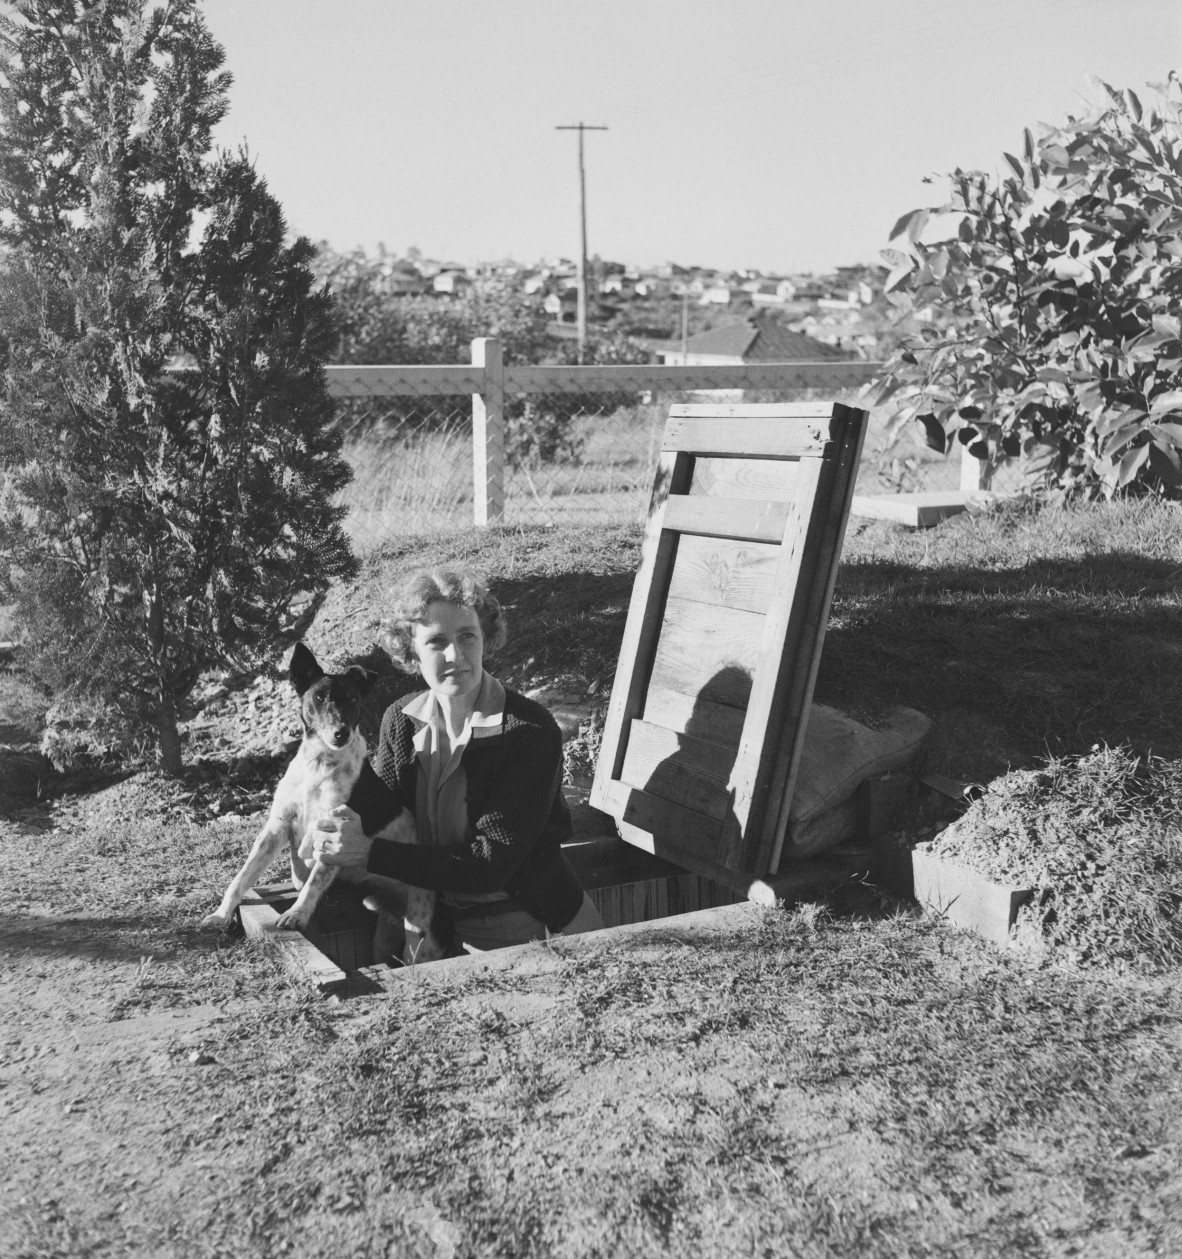 Elsie with her dog at the entrance to an air-raid shelter in the backyard at Camp Hill, 1939-1945